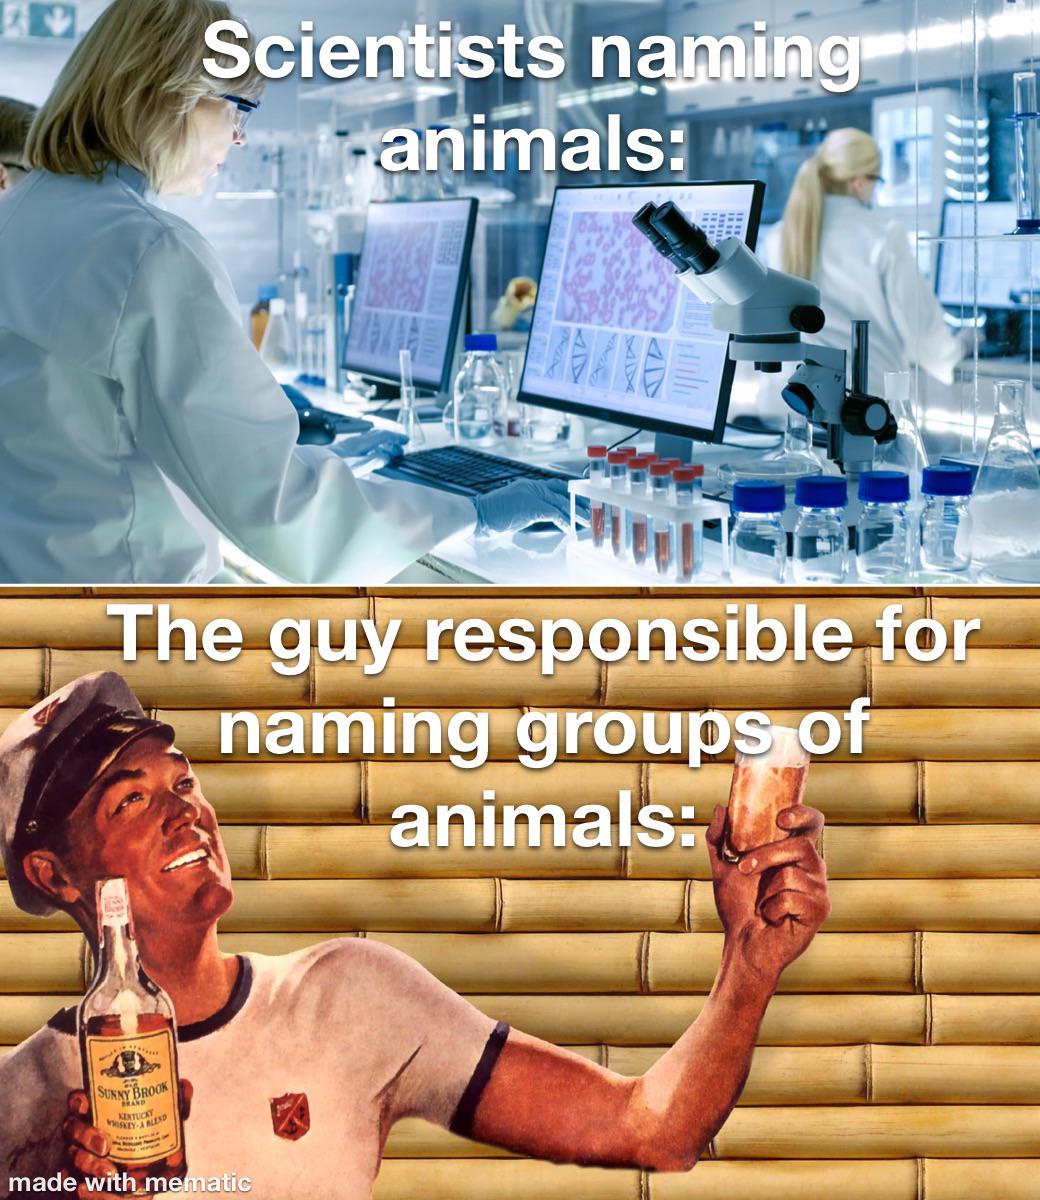 Funny and memes - senior scientist - Scientists naming Sunny Brook Kentucky WhiskeyA Blend ma The guy responsible for 2 naming groups of animals animals made with mematic